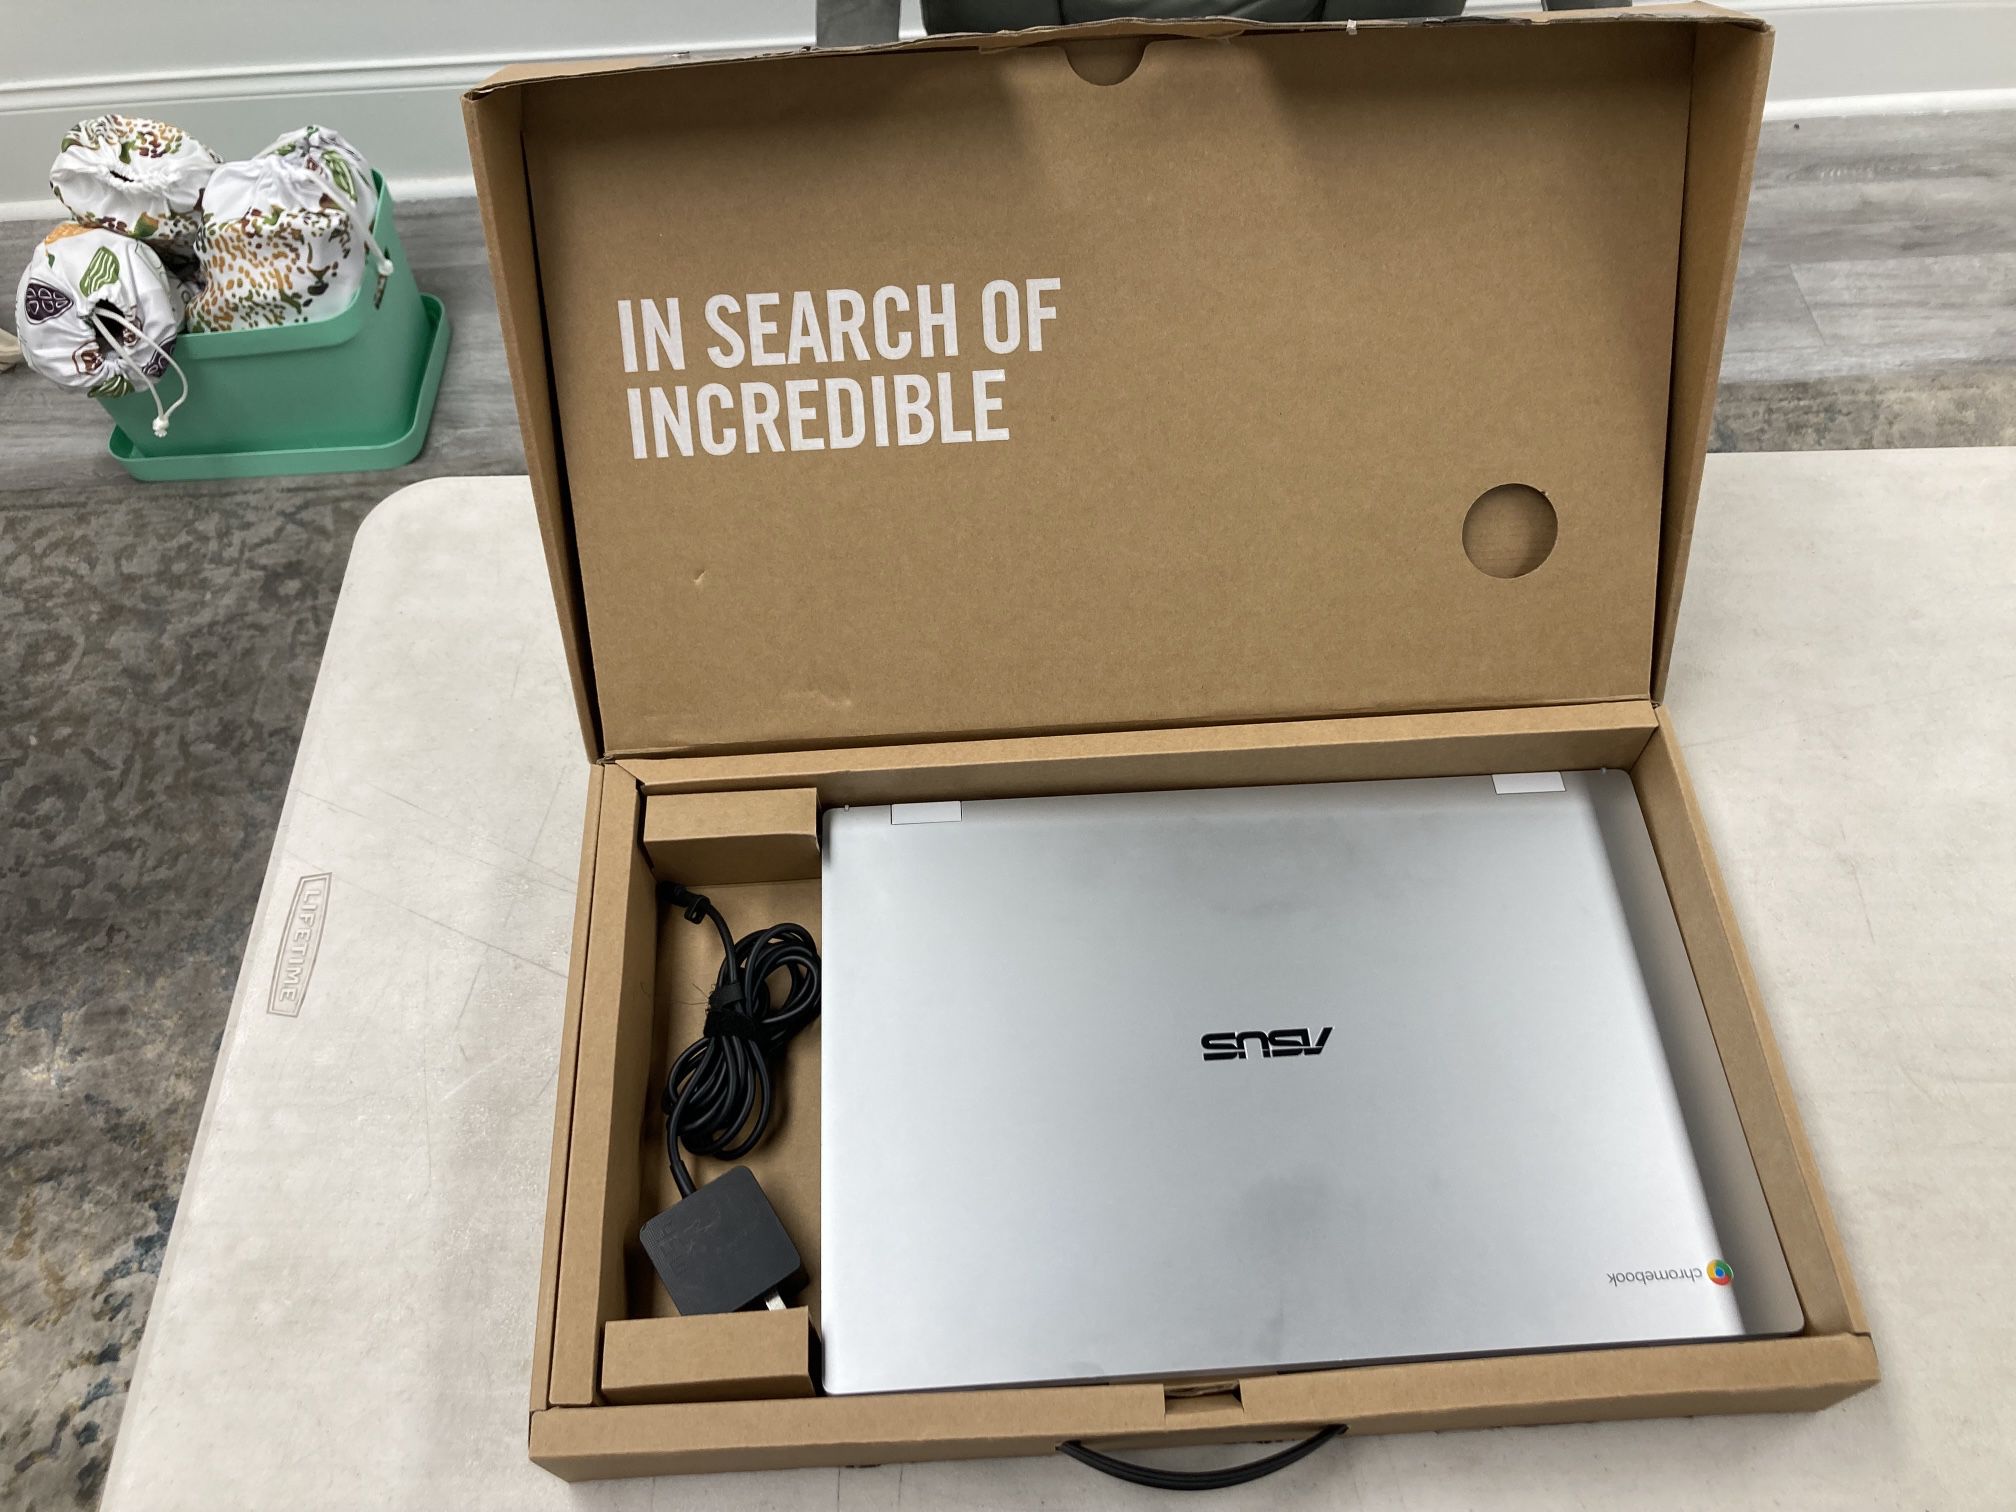 Asus 17 Inches Screen Chromebook